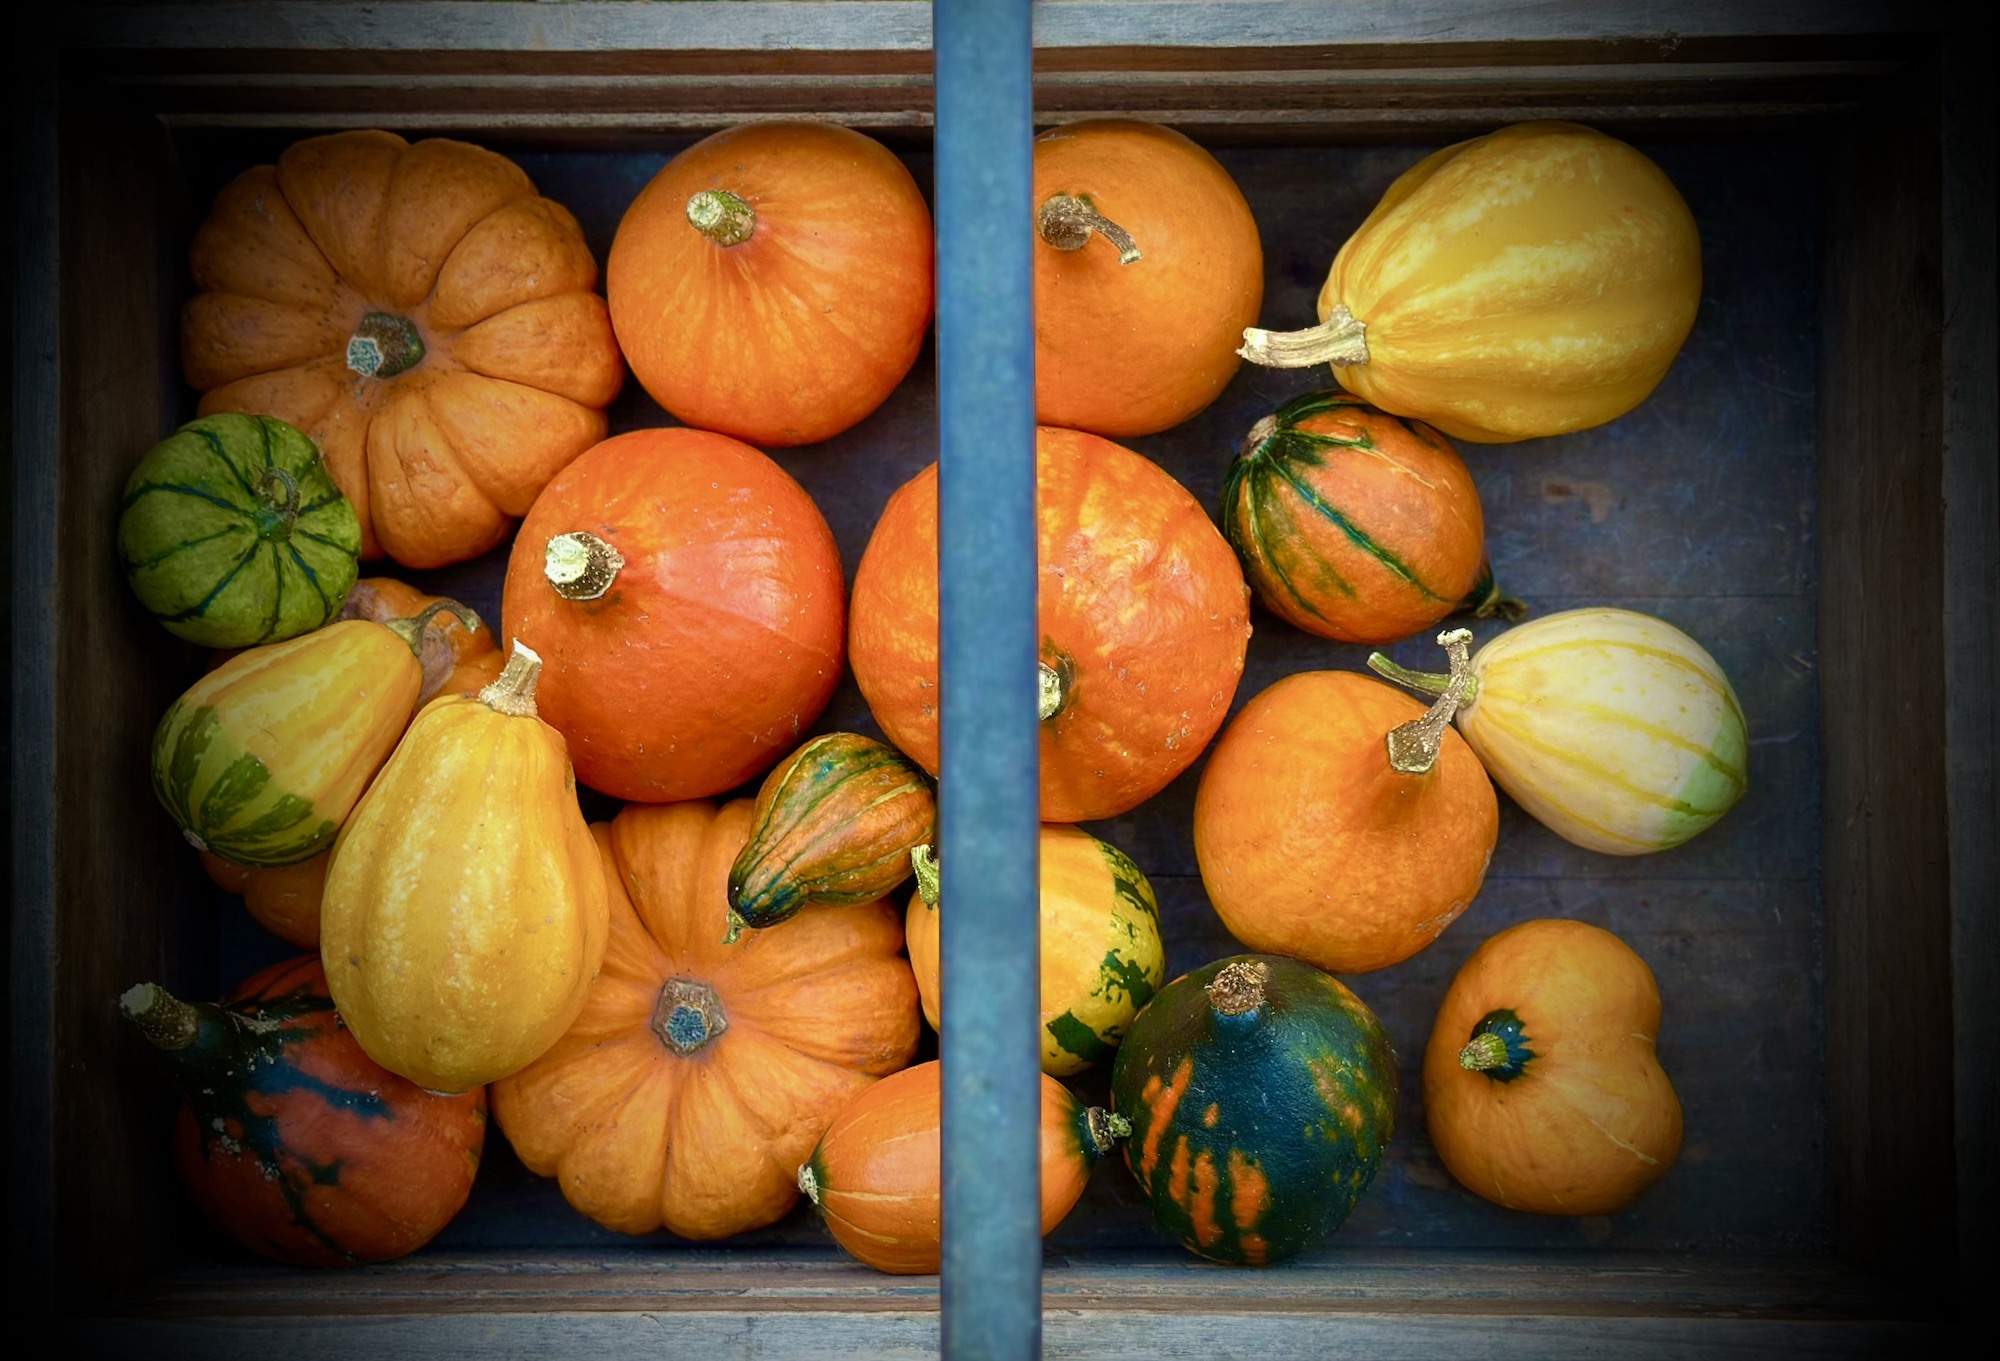 Orange yellow and green guards and pumpkins trug full of goodness